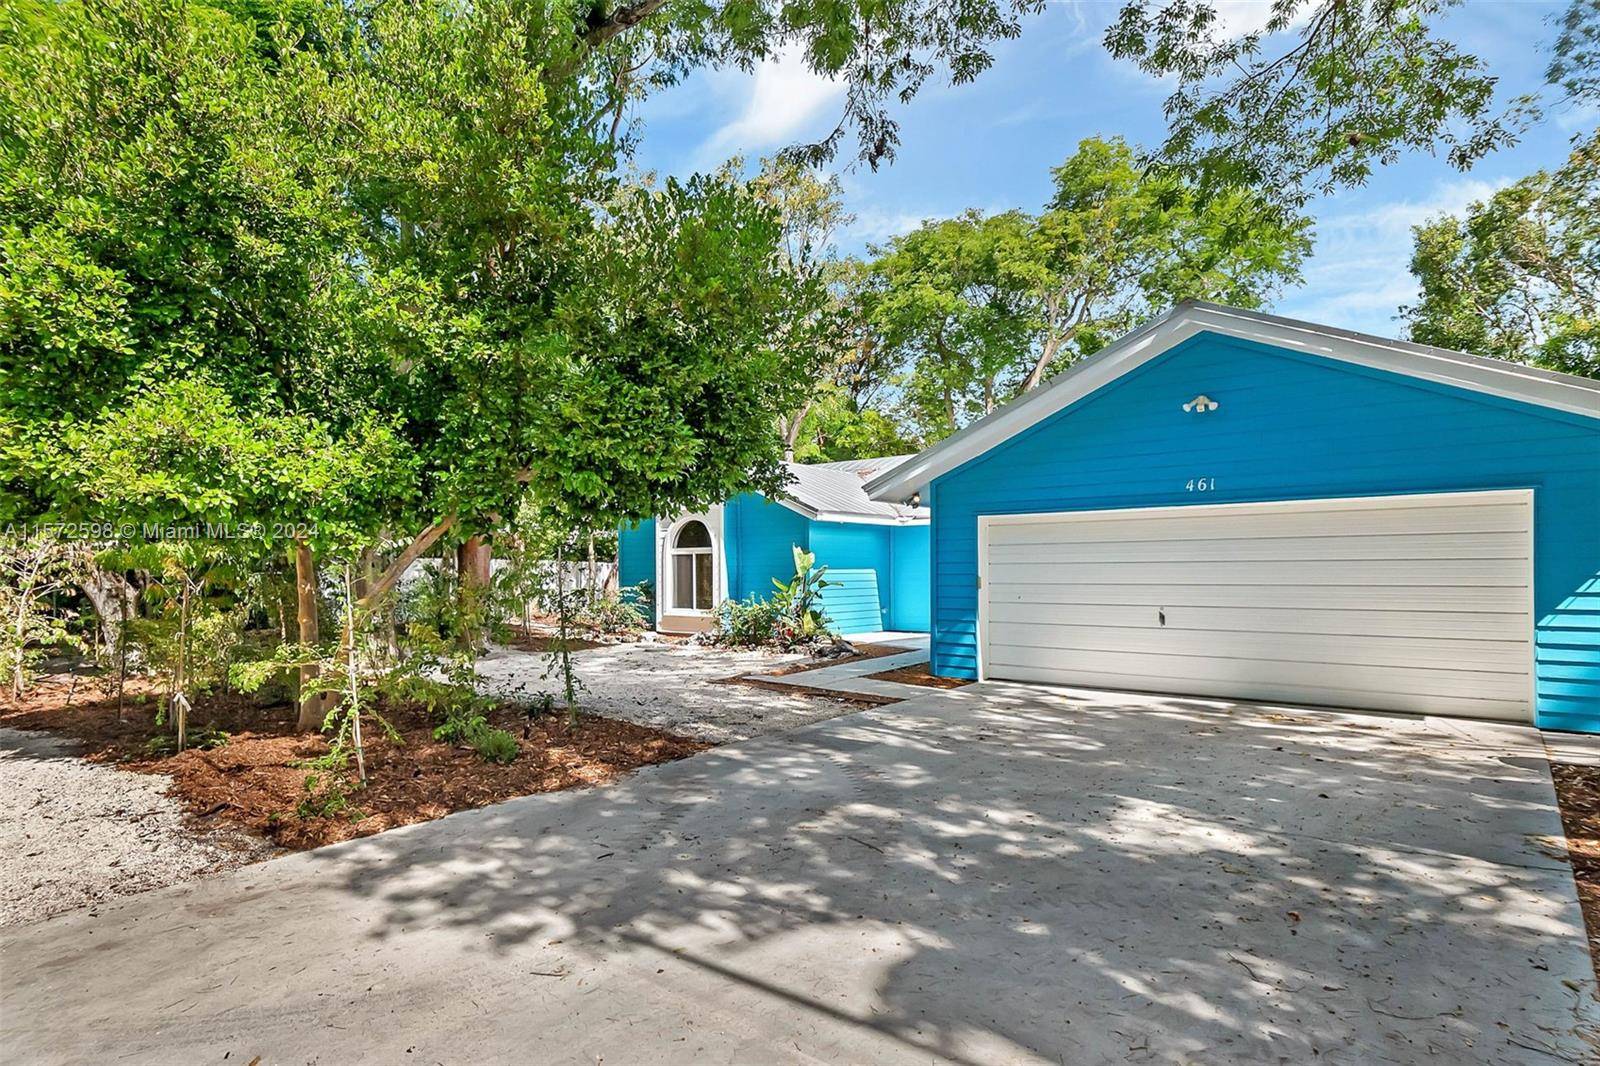 Welcome to your dream home nestled on two spacious lots offering privacy and tranquility on one of the most sought after streets in Key Largo.